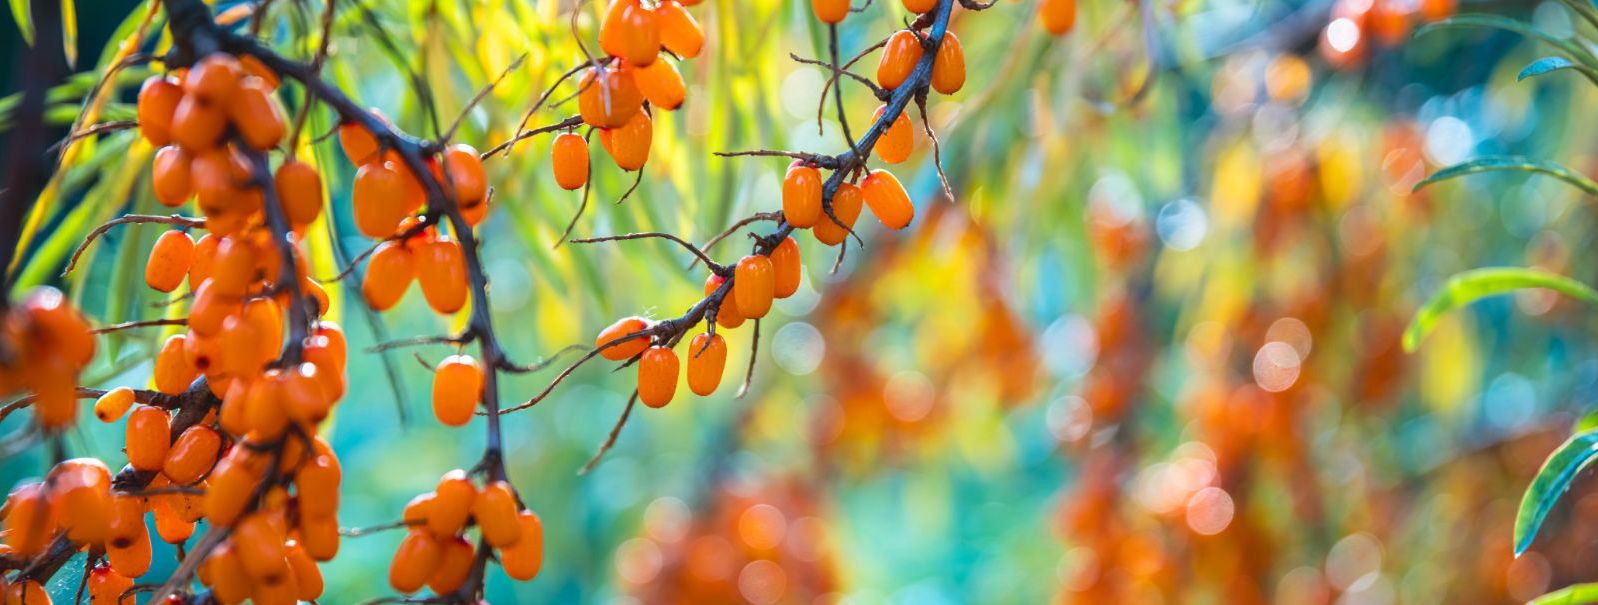 Sea buckthorn is a thorny shrub native to Europe and Asia, renowned for its bright orange berries. These berries are not only striking in appearance but are als